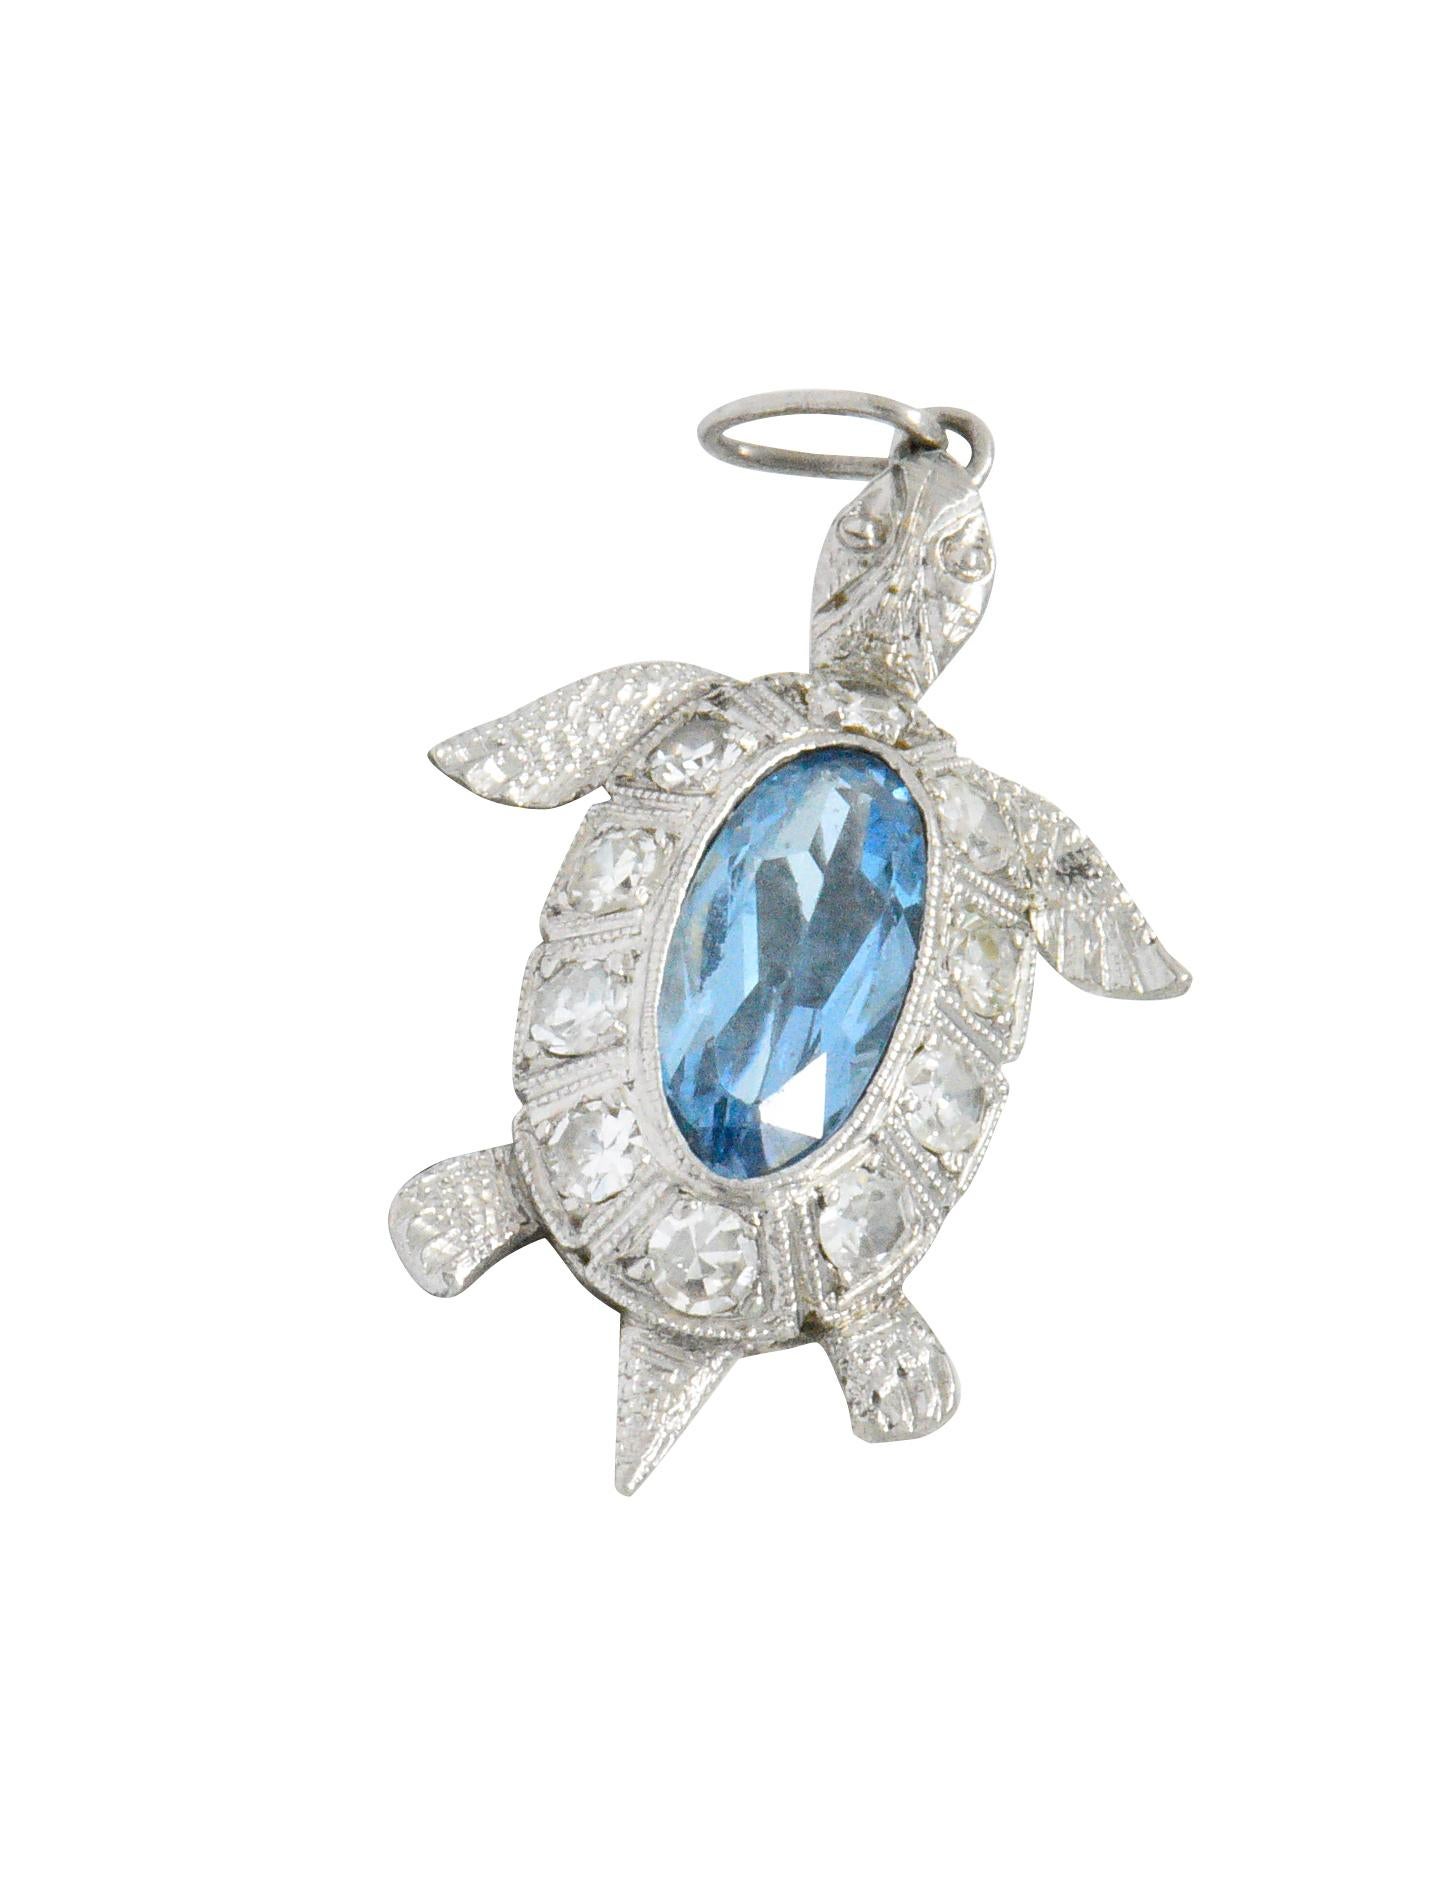 Designed as a sea turtle with an oval cut aquamarine shell weighing approximately 0.56 carat, bright light blue

With ten single cut diamonds around the shell weighing approximately 0.30 carat, eye-clean and white

Detailed engraving on head, feet